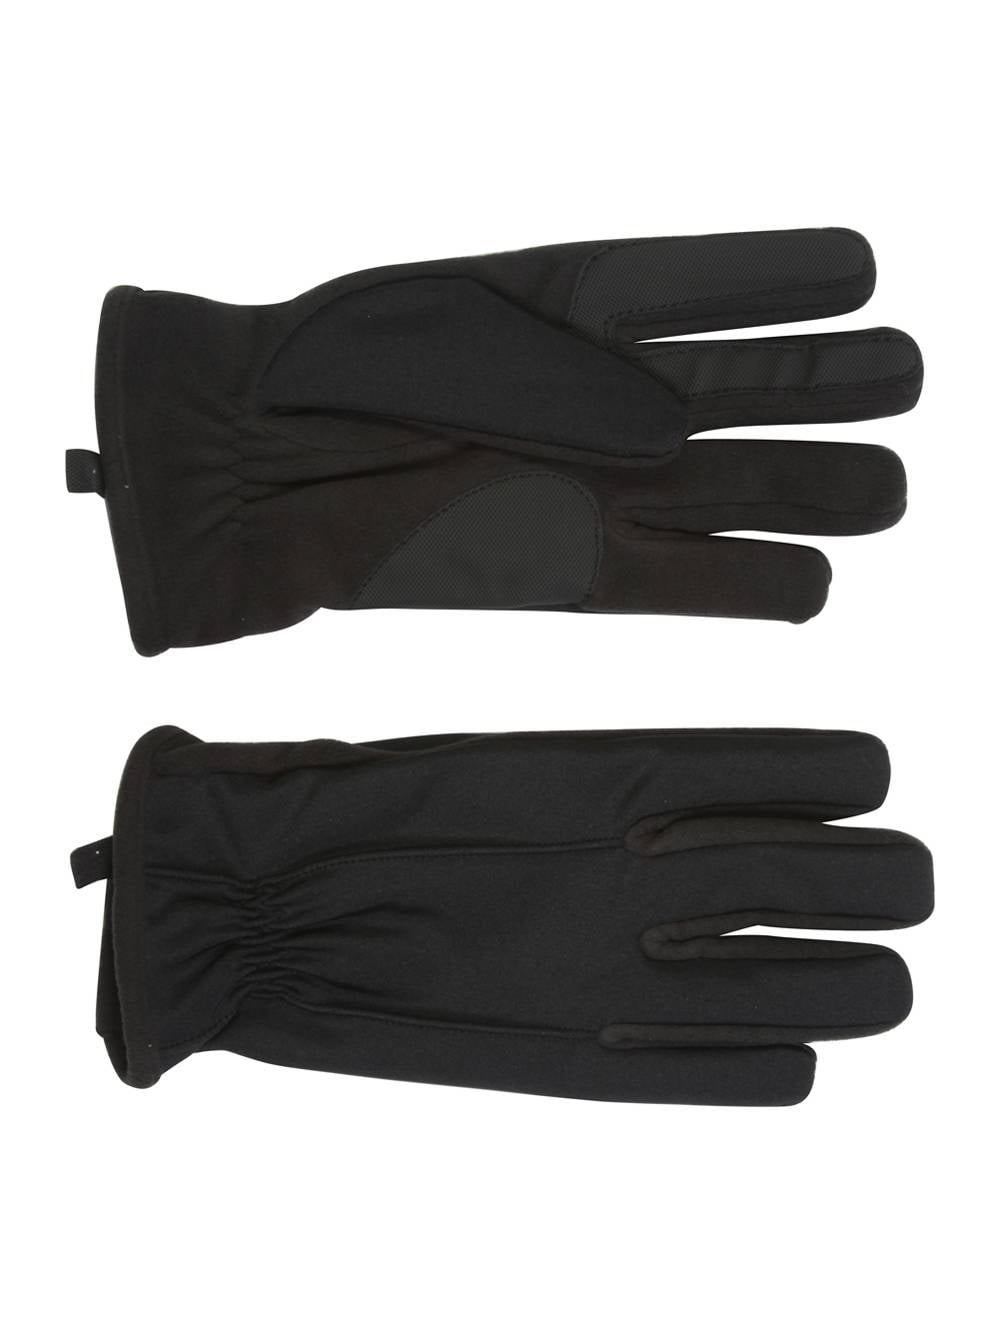 totes leather gloves